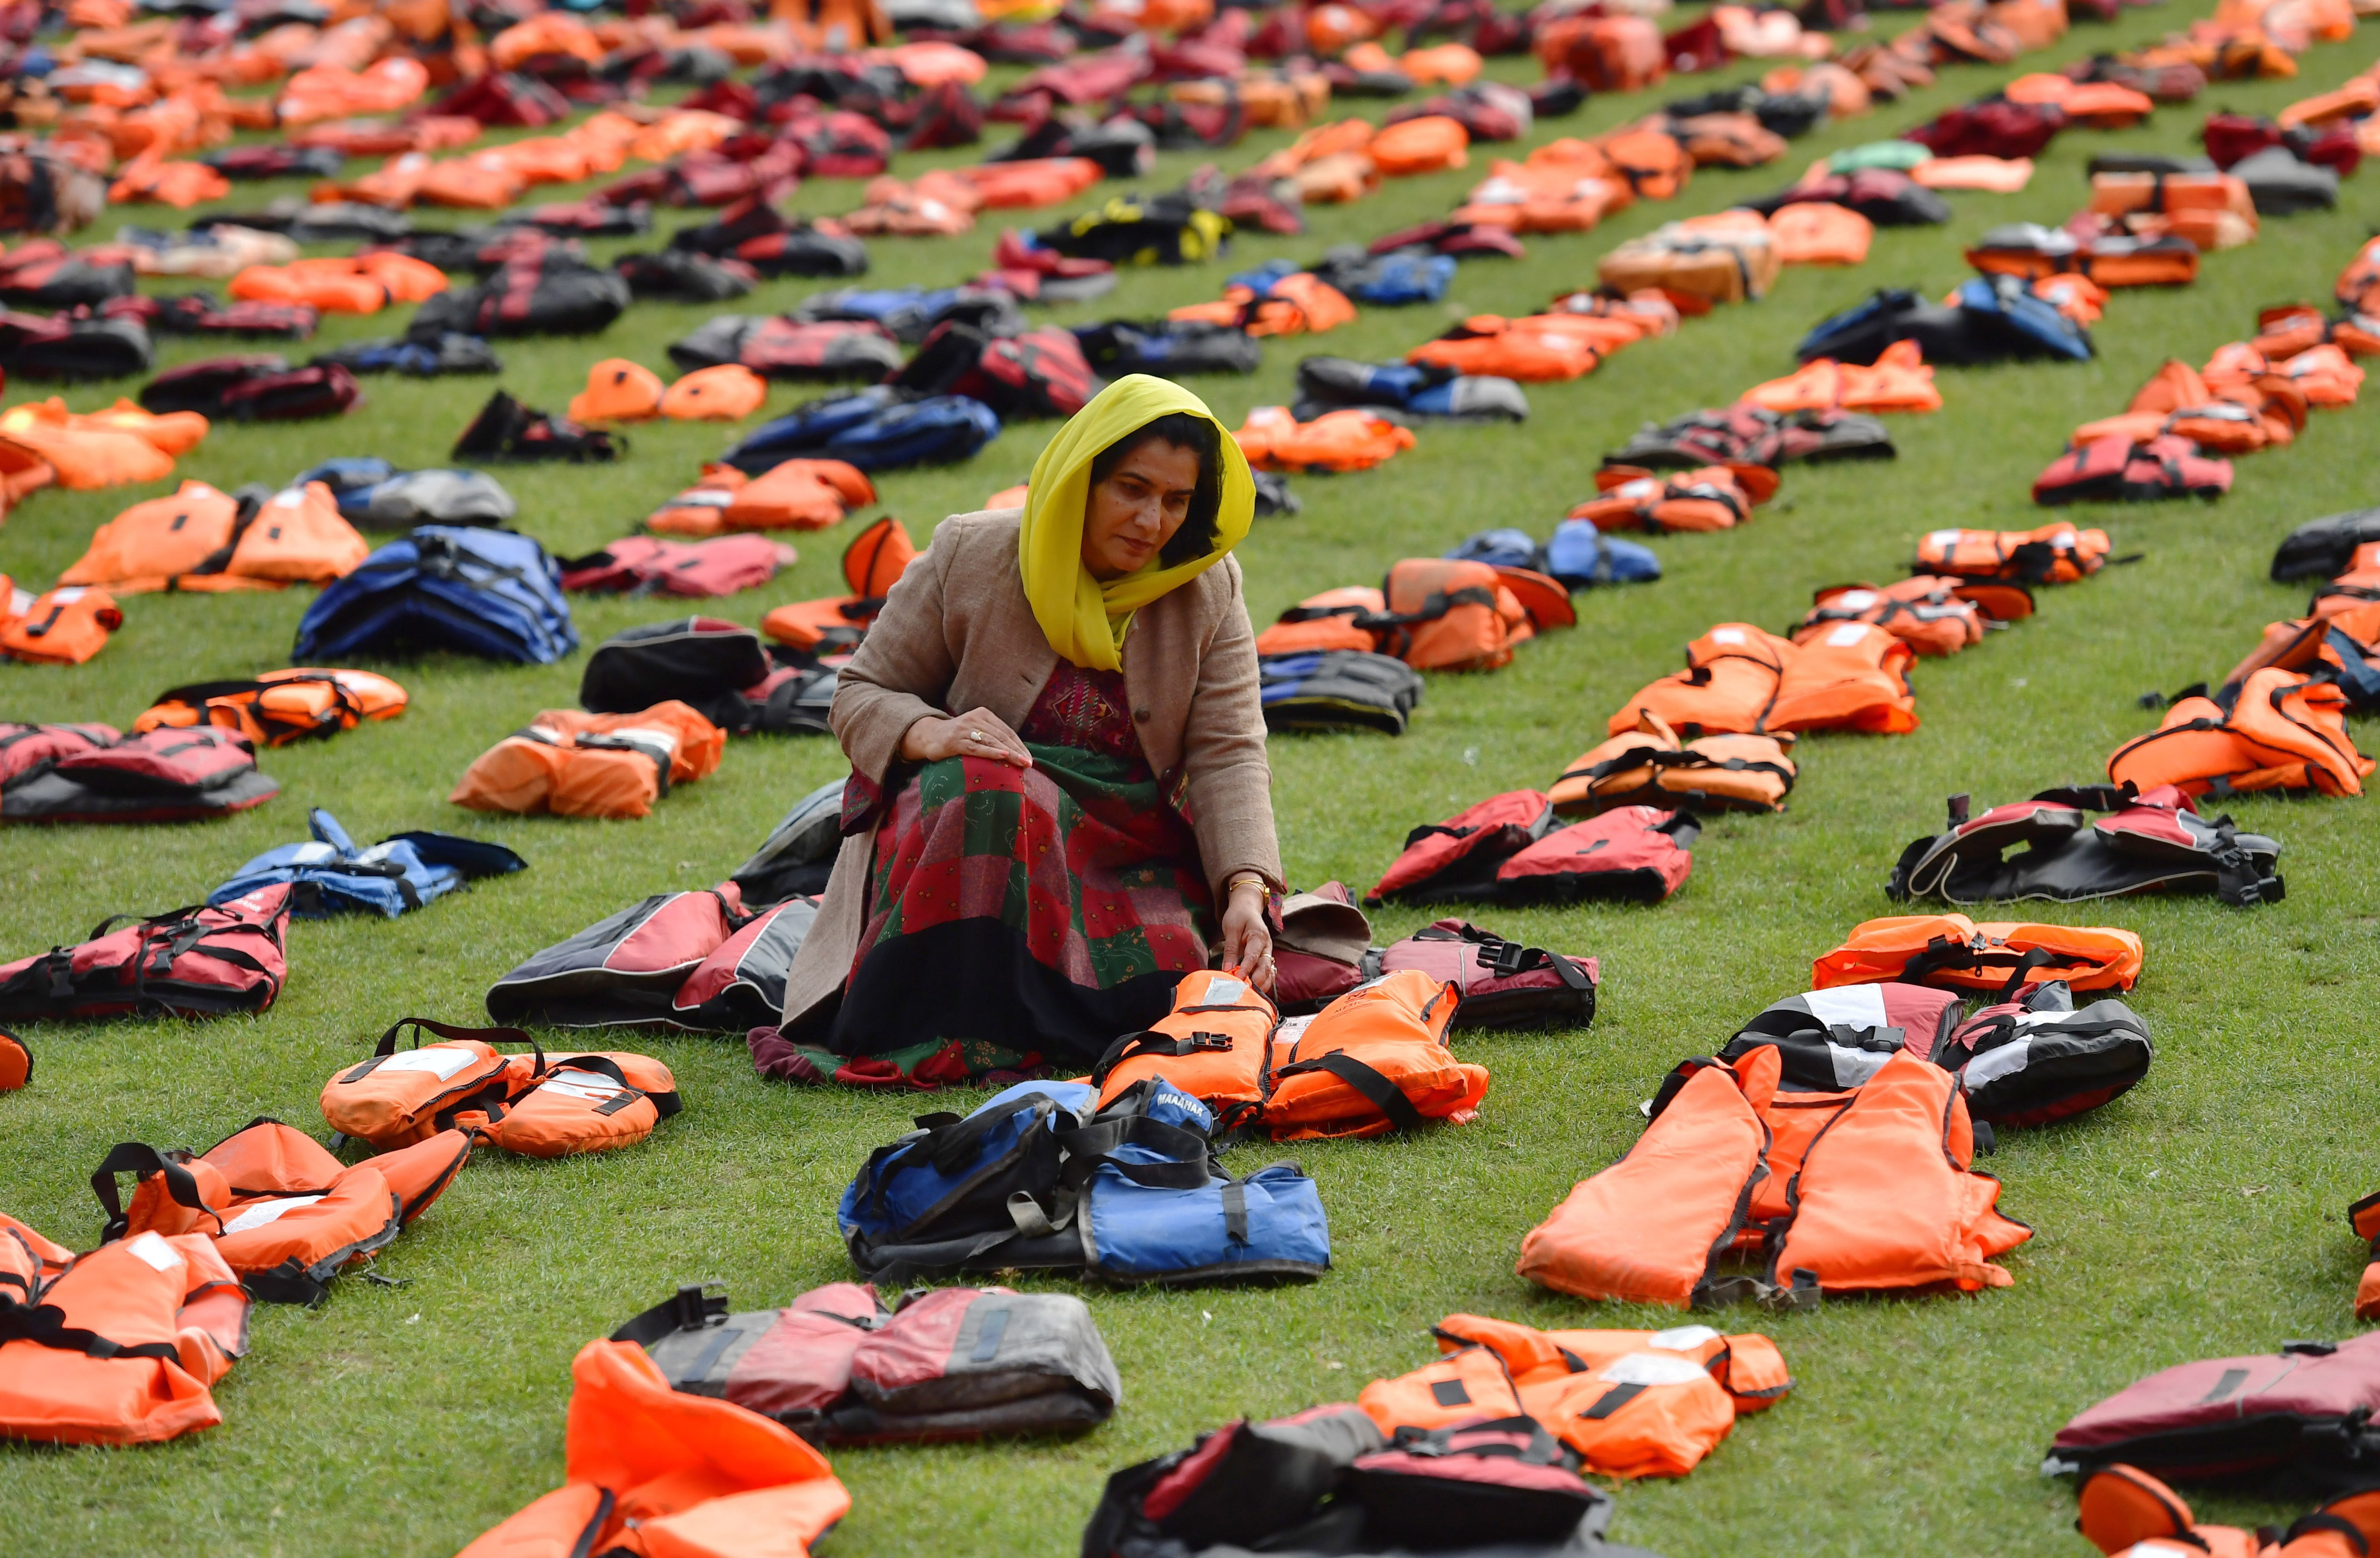 Rahela Sidiqi, a trustee of Women for Refugee Women and originally from Afghanistan, poses for a photograph among lifejackets that have been used by refugees to cross the sea to Europe as they are laid out in Parliament Square